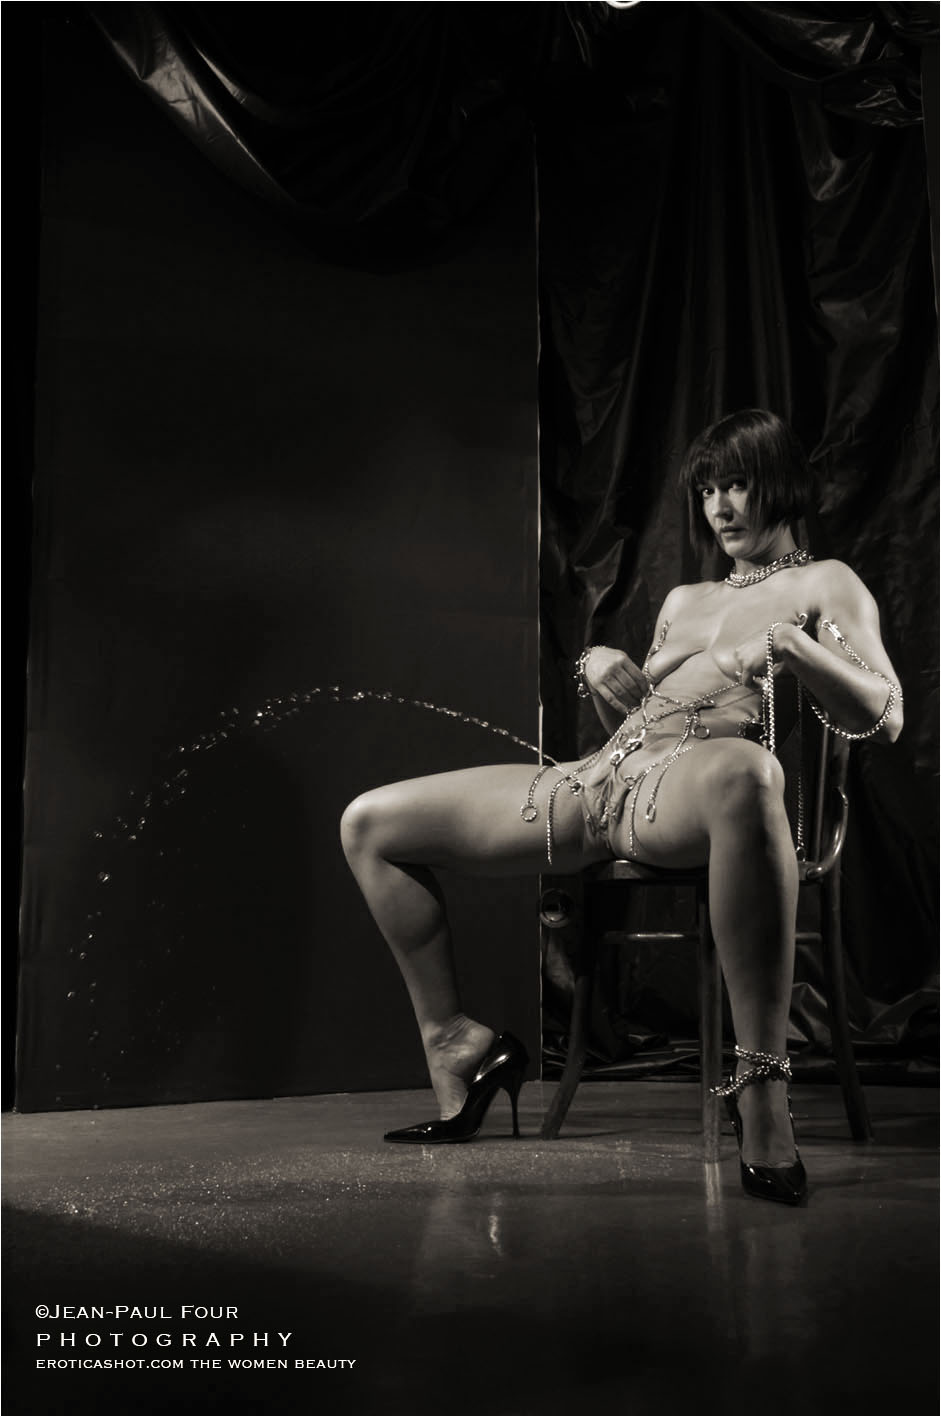 Linda, slave, bitch, extreme model, extreme sub, pussy and tits torture, pee game, suspension, wax game, follow her on eroticashot.com, pict by ©Jean-Paul Four